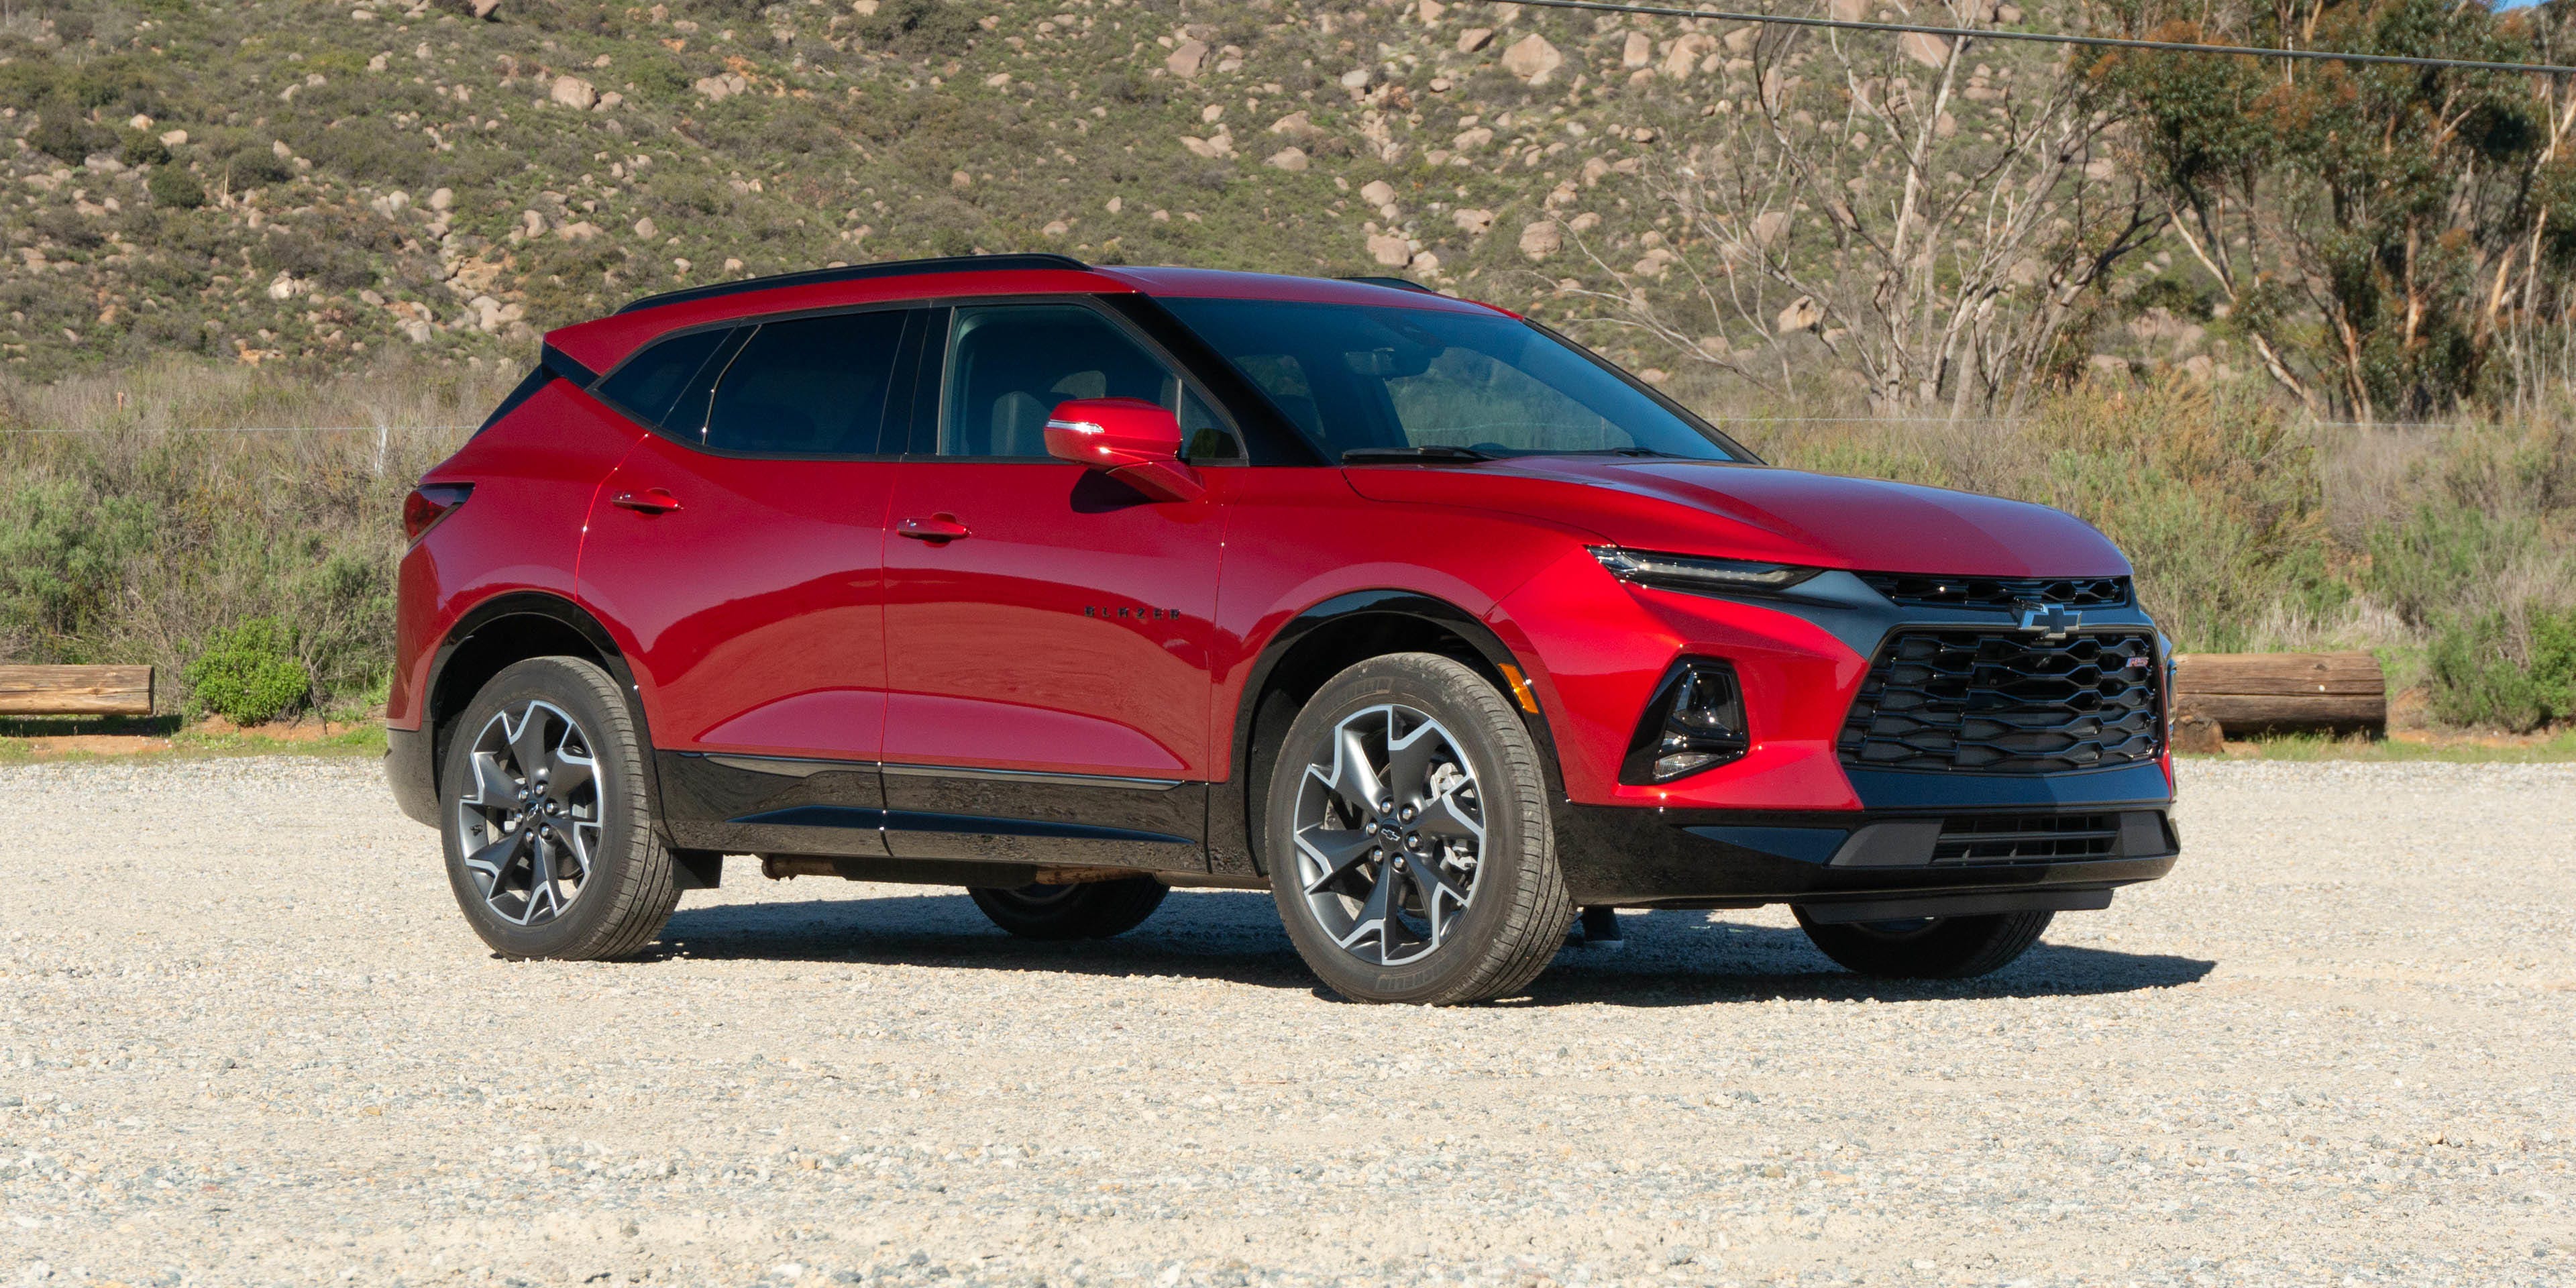 reality whiskey once again 2020 Chevy Blazer: Model overview, pricing, tech and specs - CNET